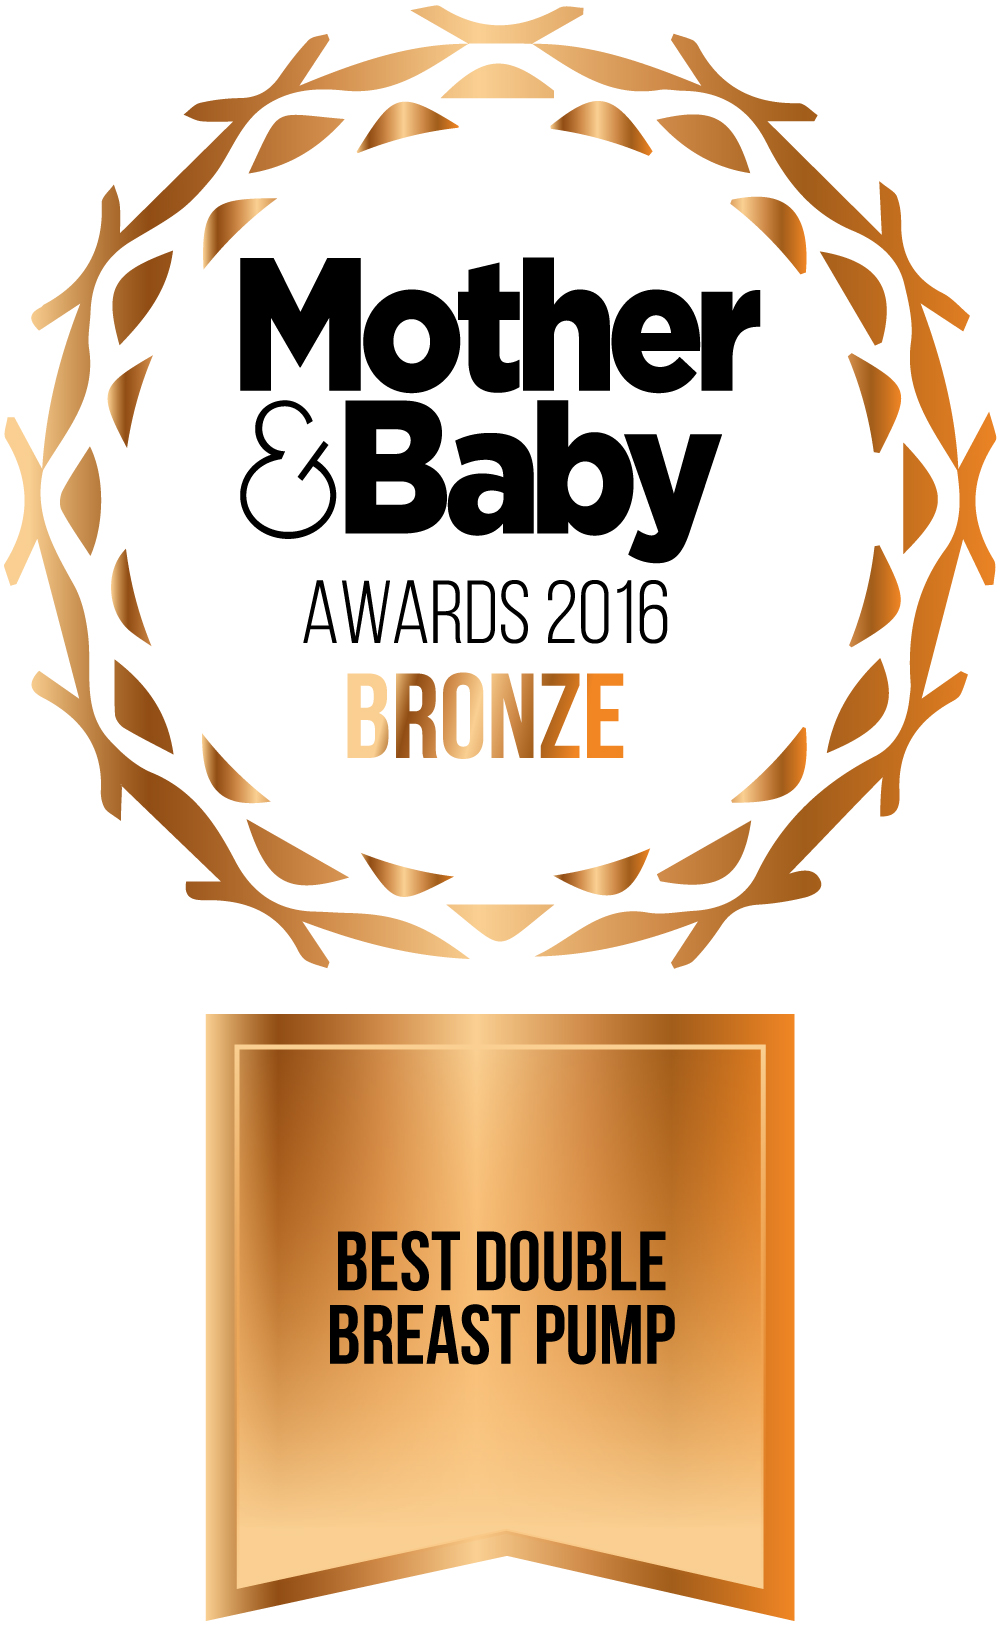 Best Double Breast Pump Award by Mother and Baby 2016